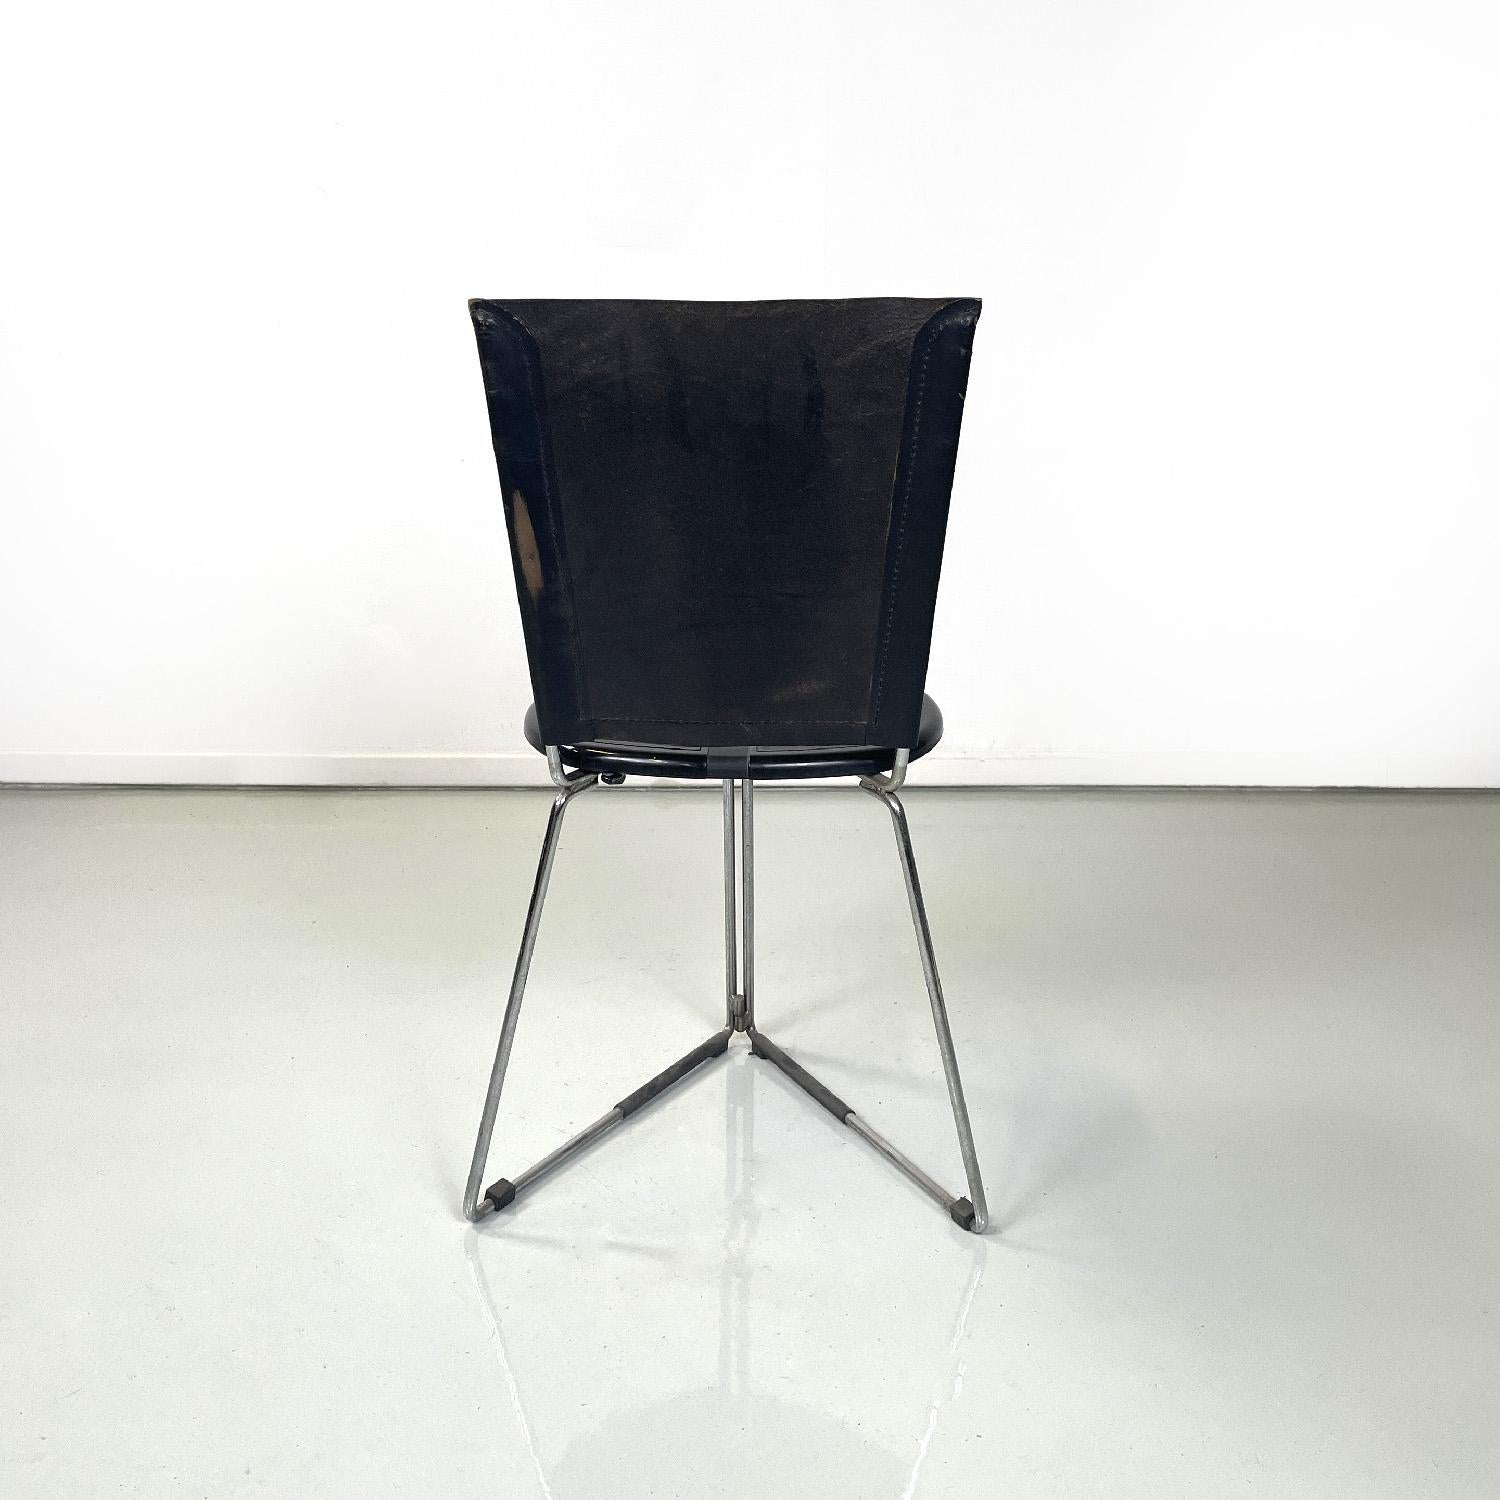 Late 20th Century Italian modern black chair Terna by Gaspare Cairoli for Seccose, 1980s For Sale